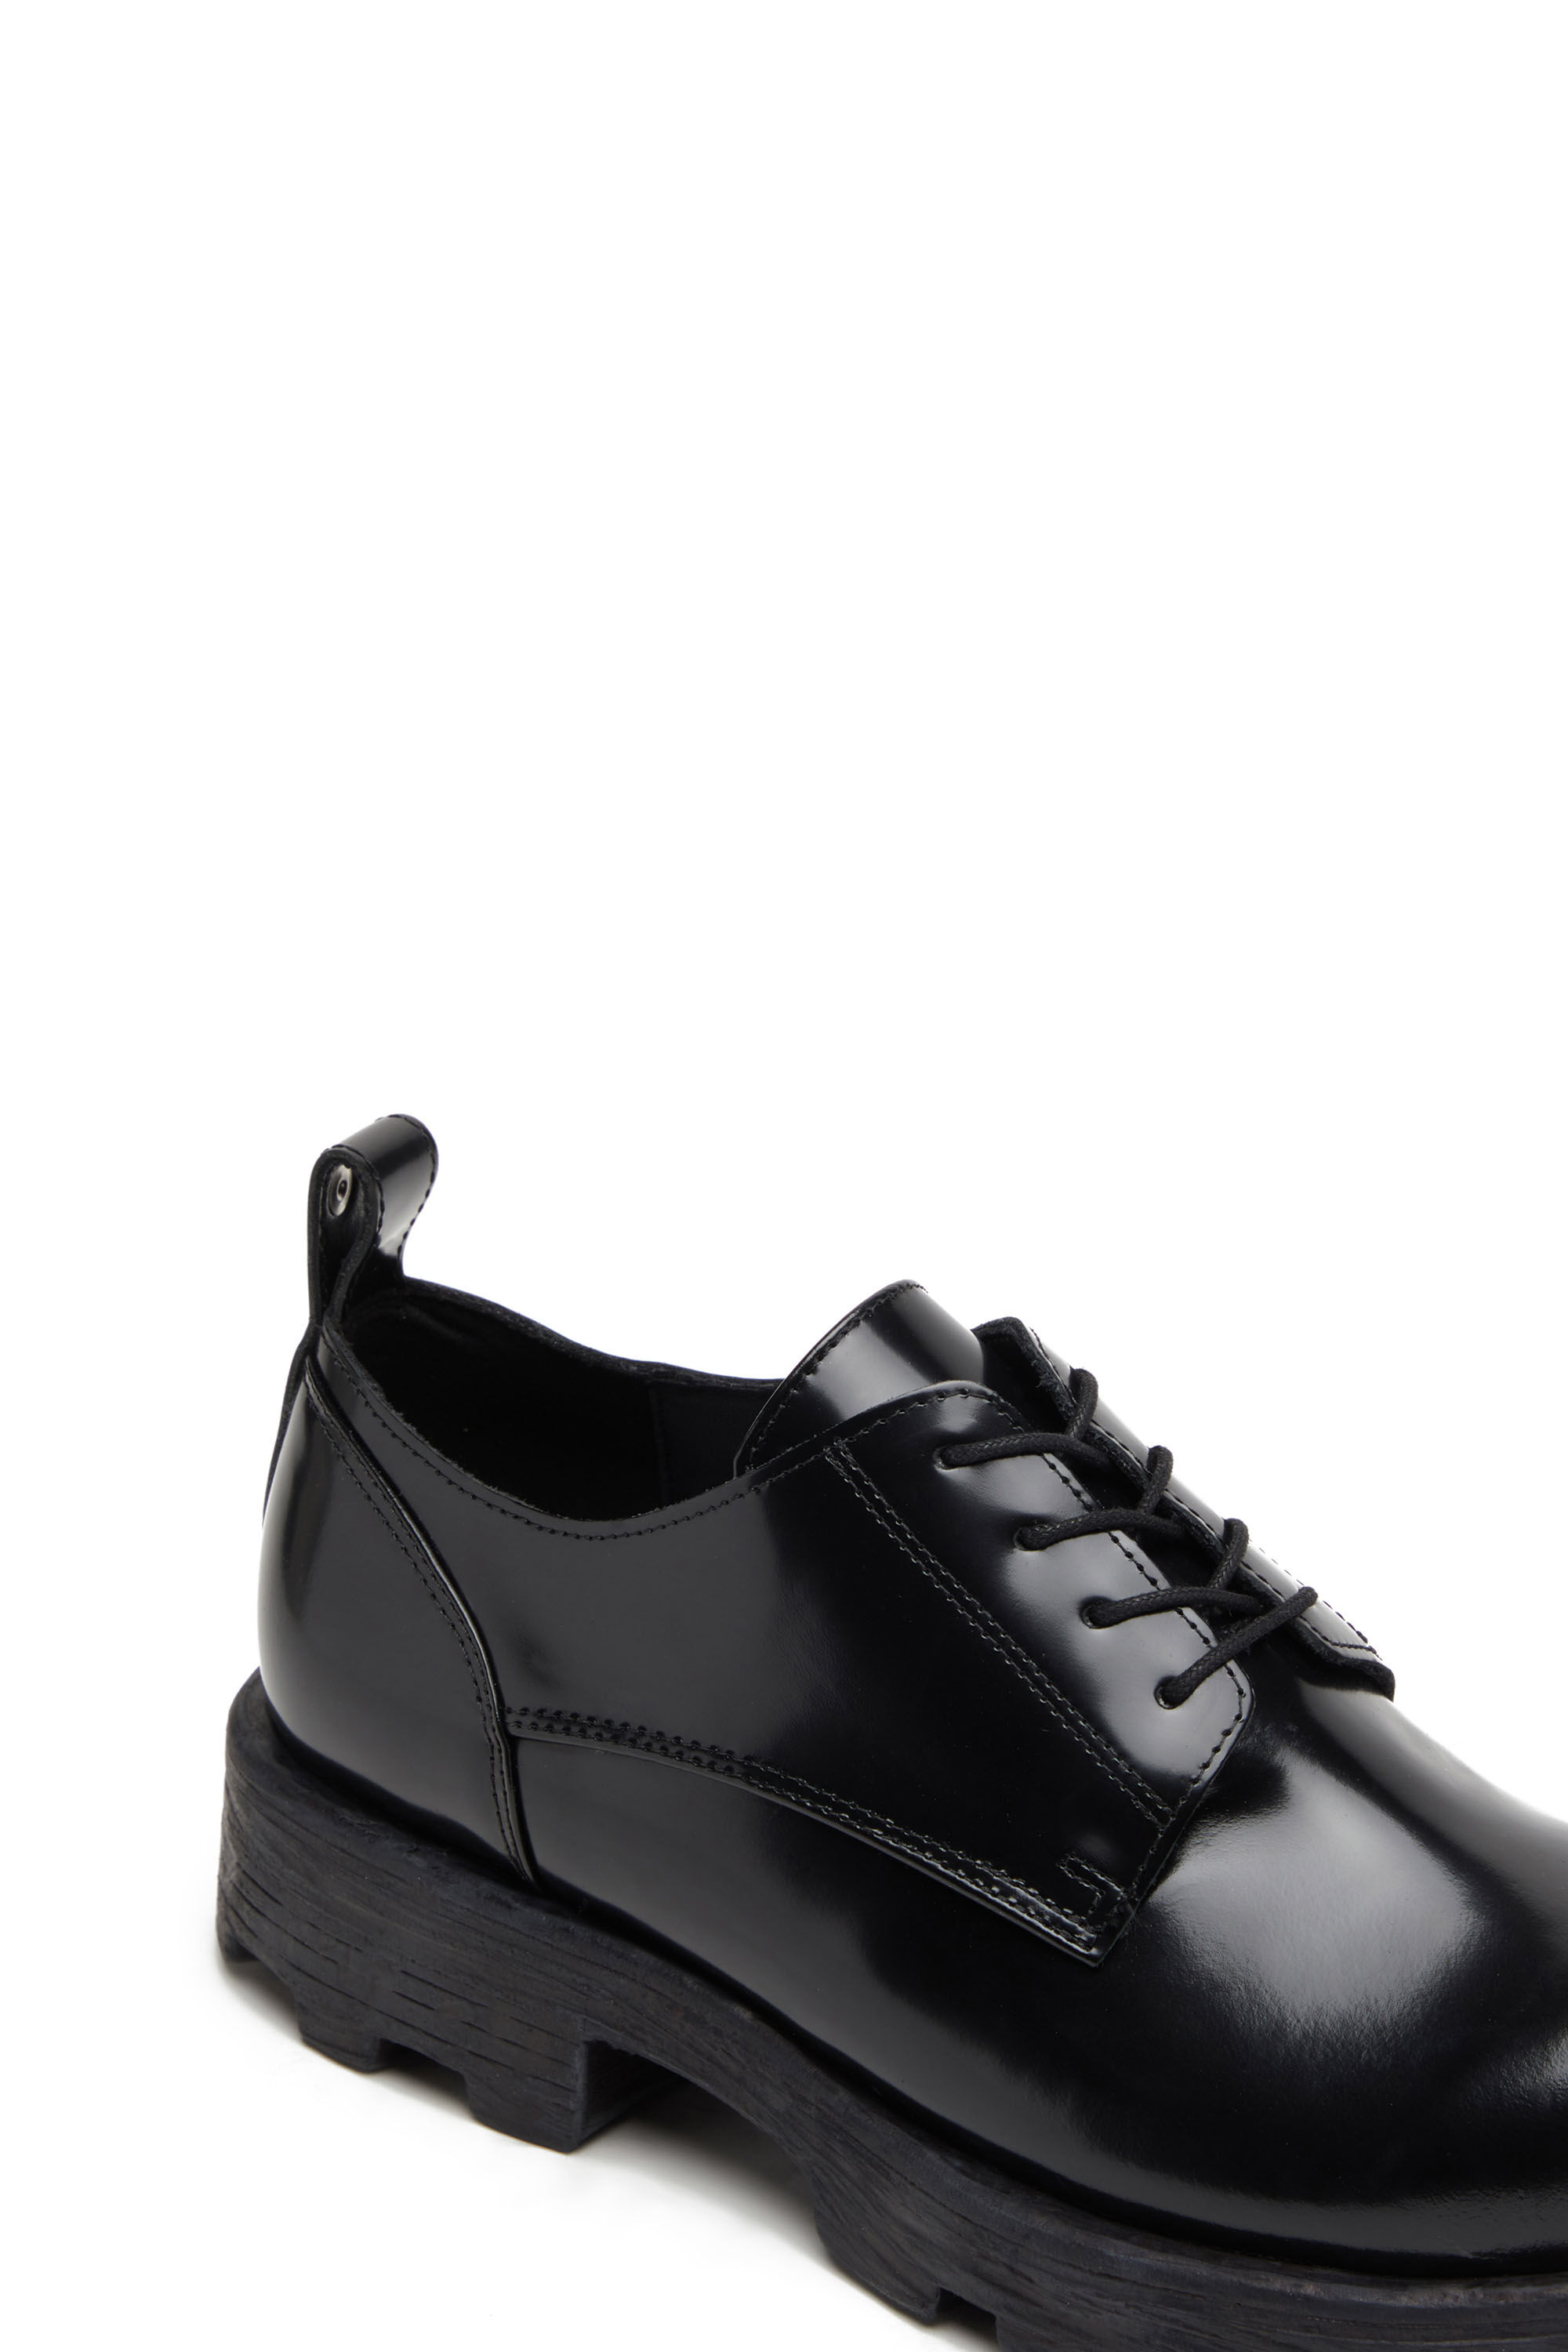 Diesel - D-HAMMER SH, Man D-Hammer SH - Lace-up shoes in shiny leather in Black - Image 6